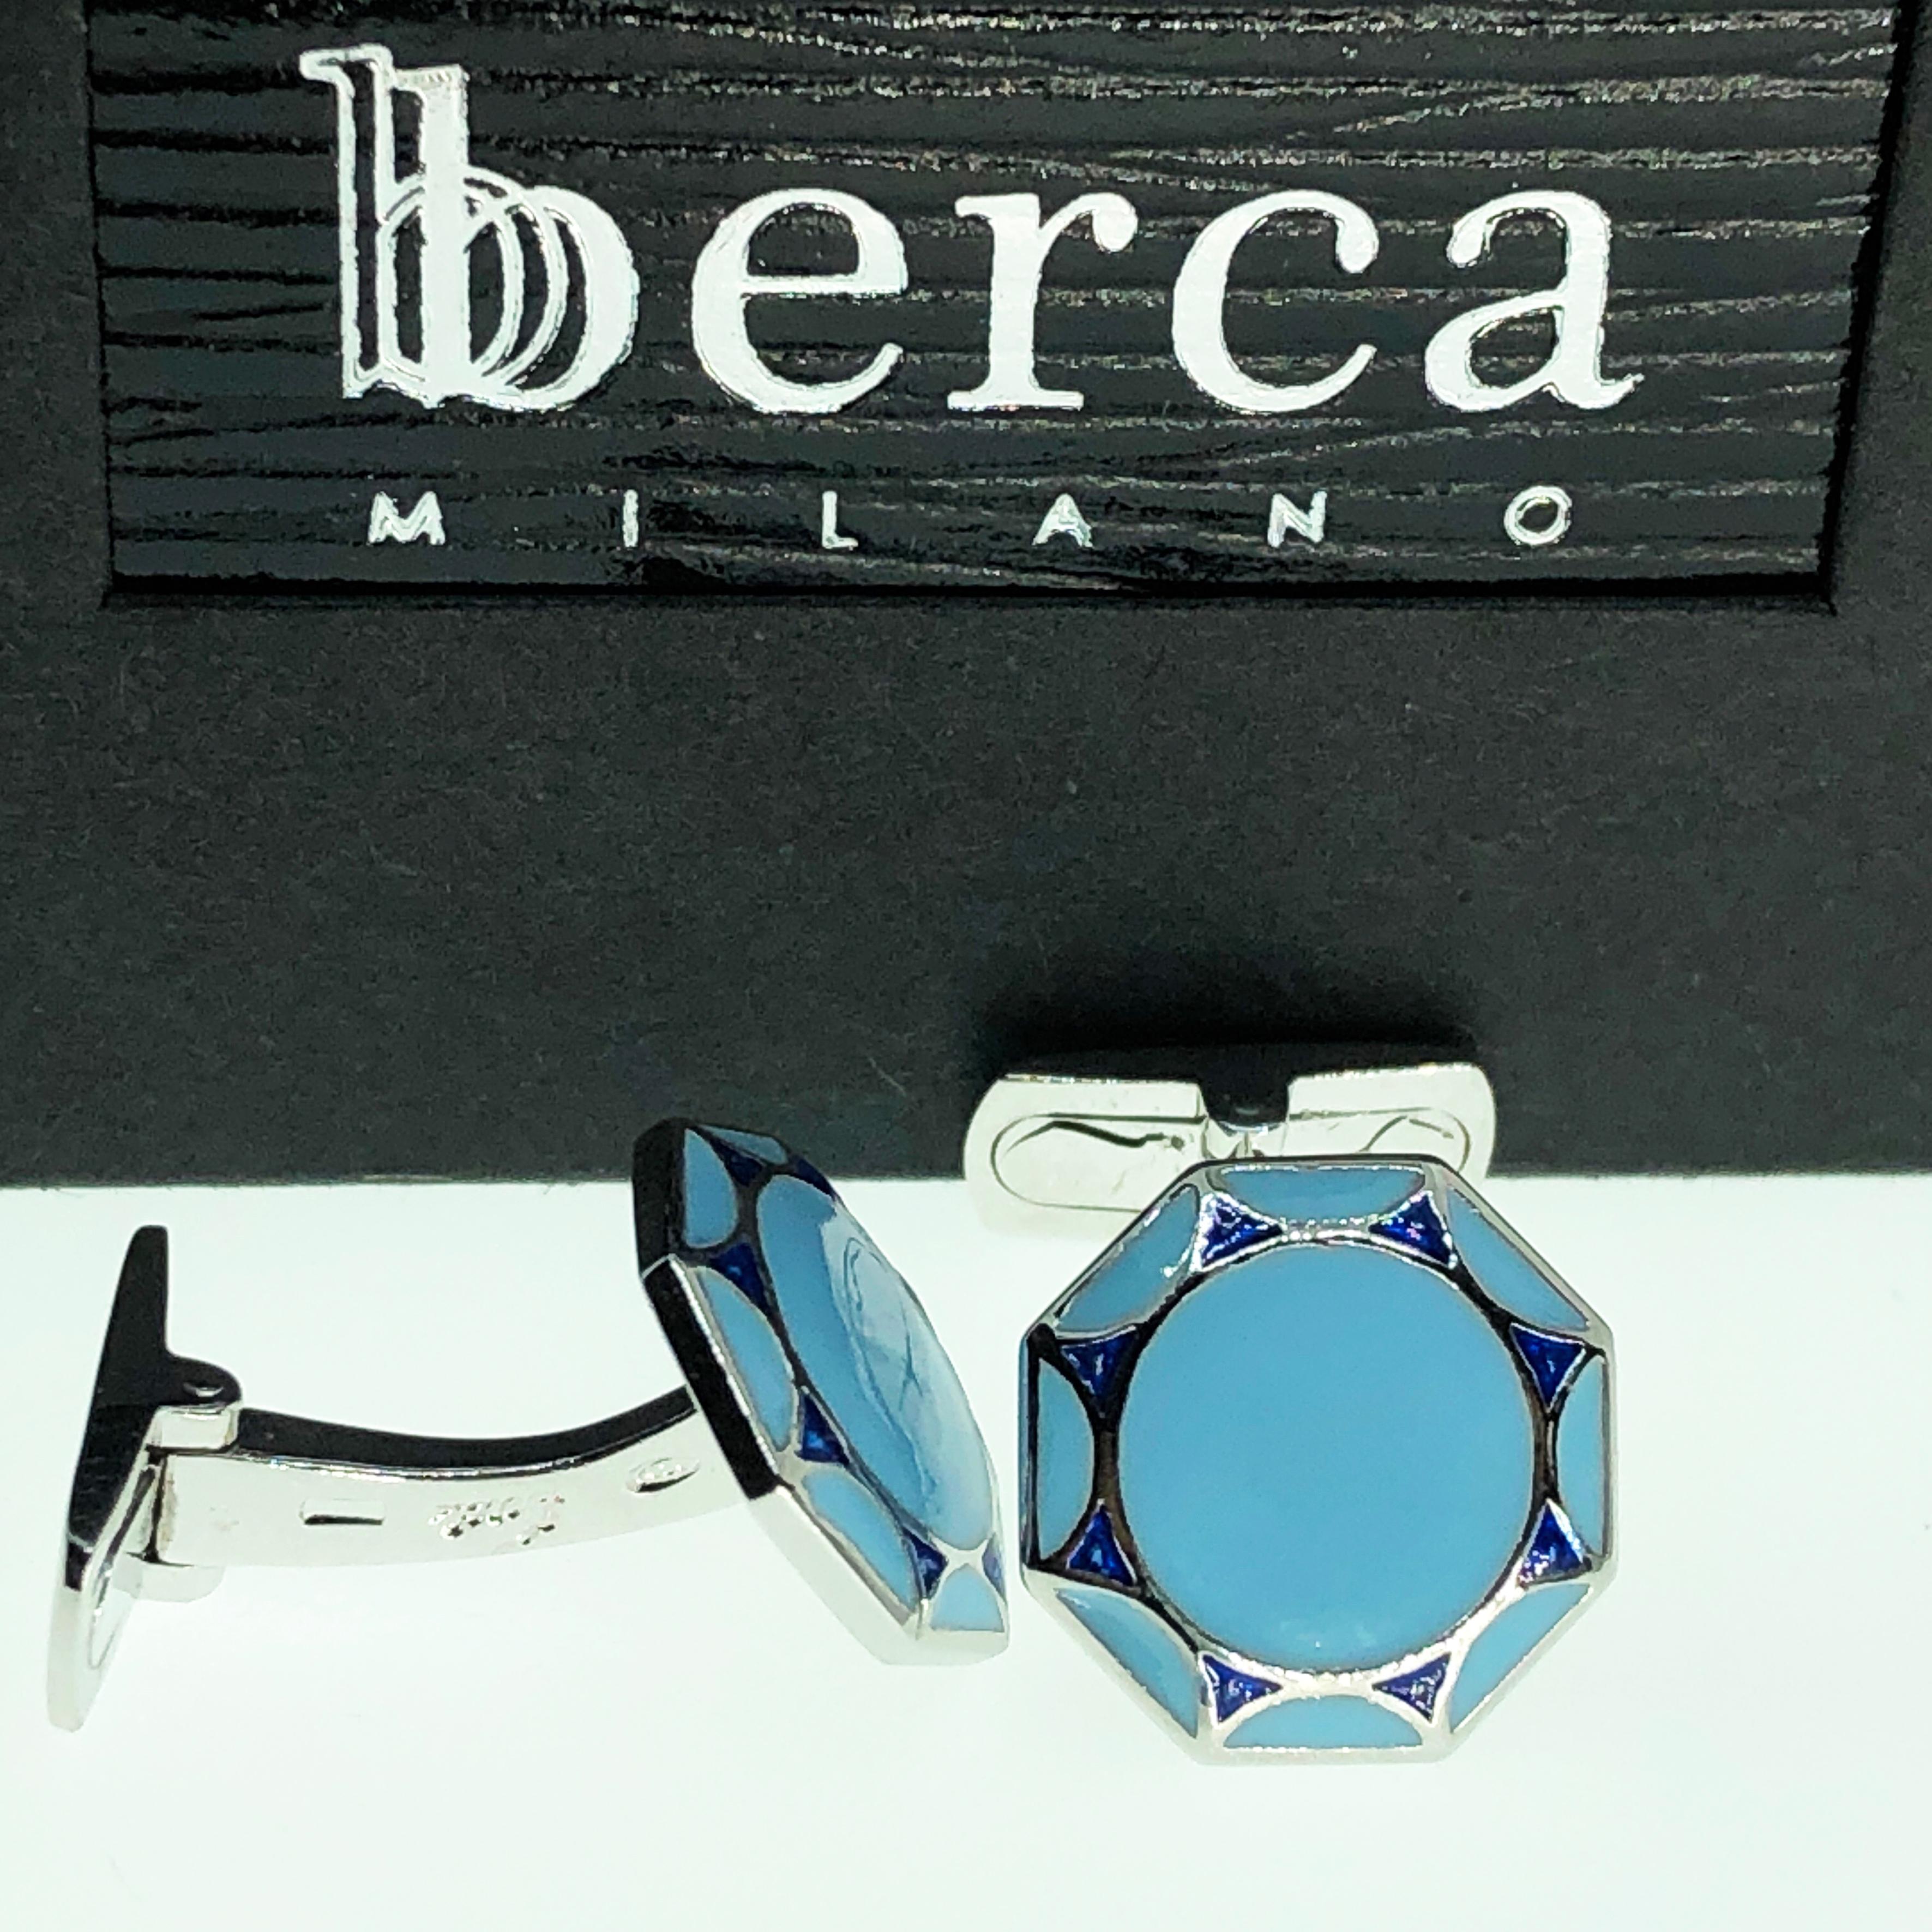 Chic yet Timeless Octagonal Blue and Light Blue Hand Enamelled Sterling Silver Cufflinks, T-bar back.
In our Smart Black Box.

Front Diameter about 0.55 inches.